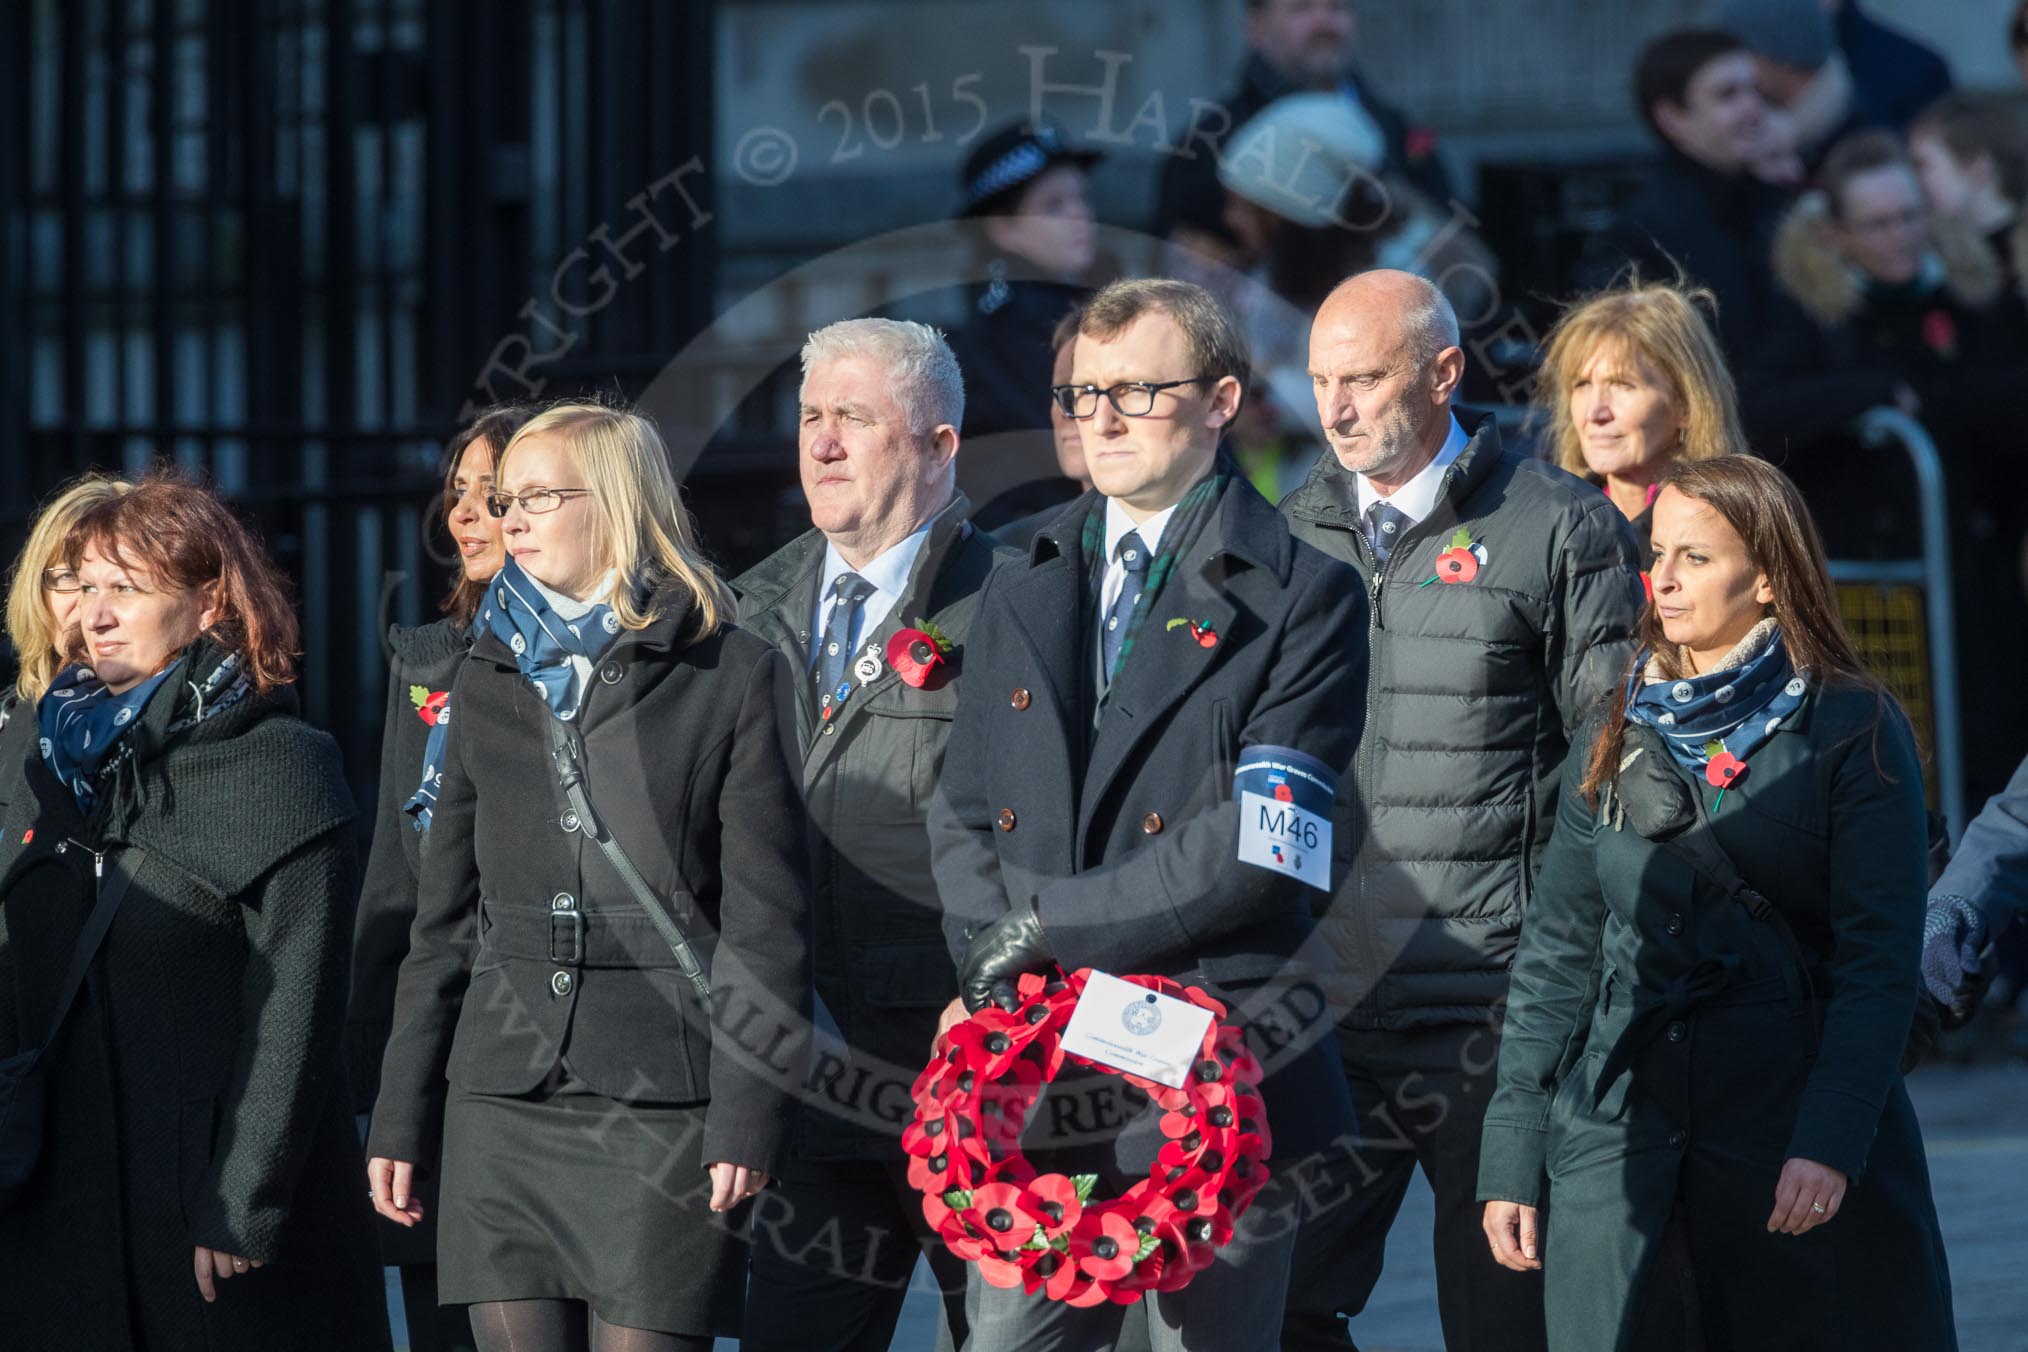 March Past, Remembrance Sunday at the Cenotaph 2016: M46 Commonwealth War Graves Commission.
Cenotaph, Whitehall, London SW1,
London,
Greater London,
United Kingdom,
on 13 November 2016 at 13:20, image #3002